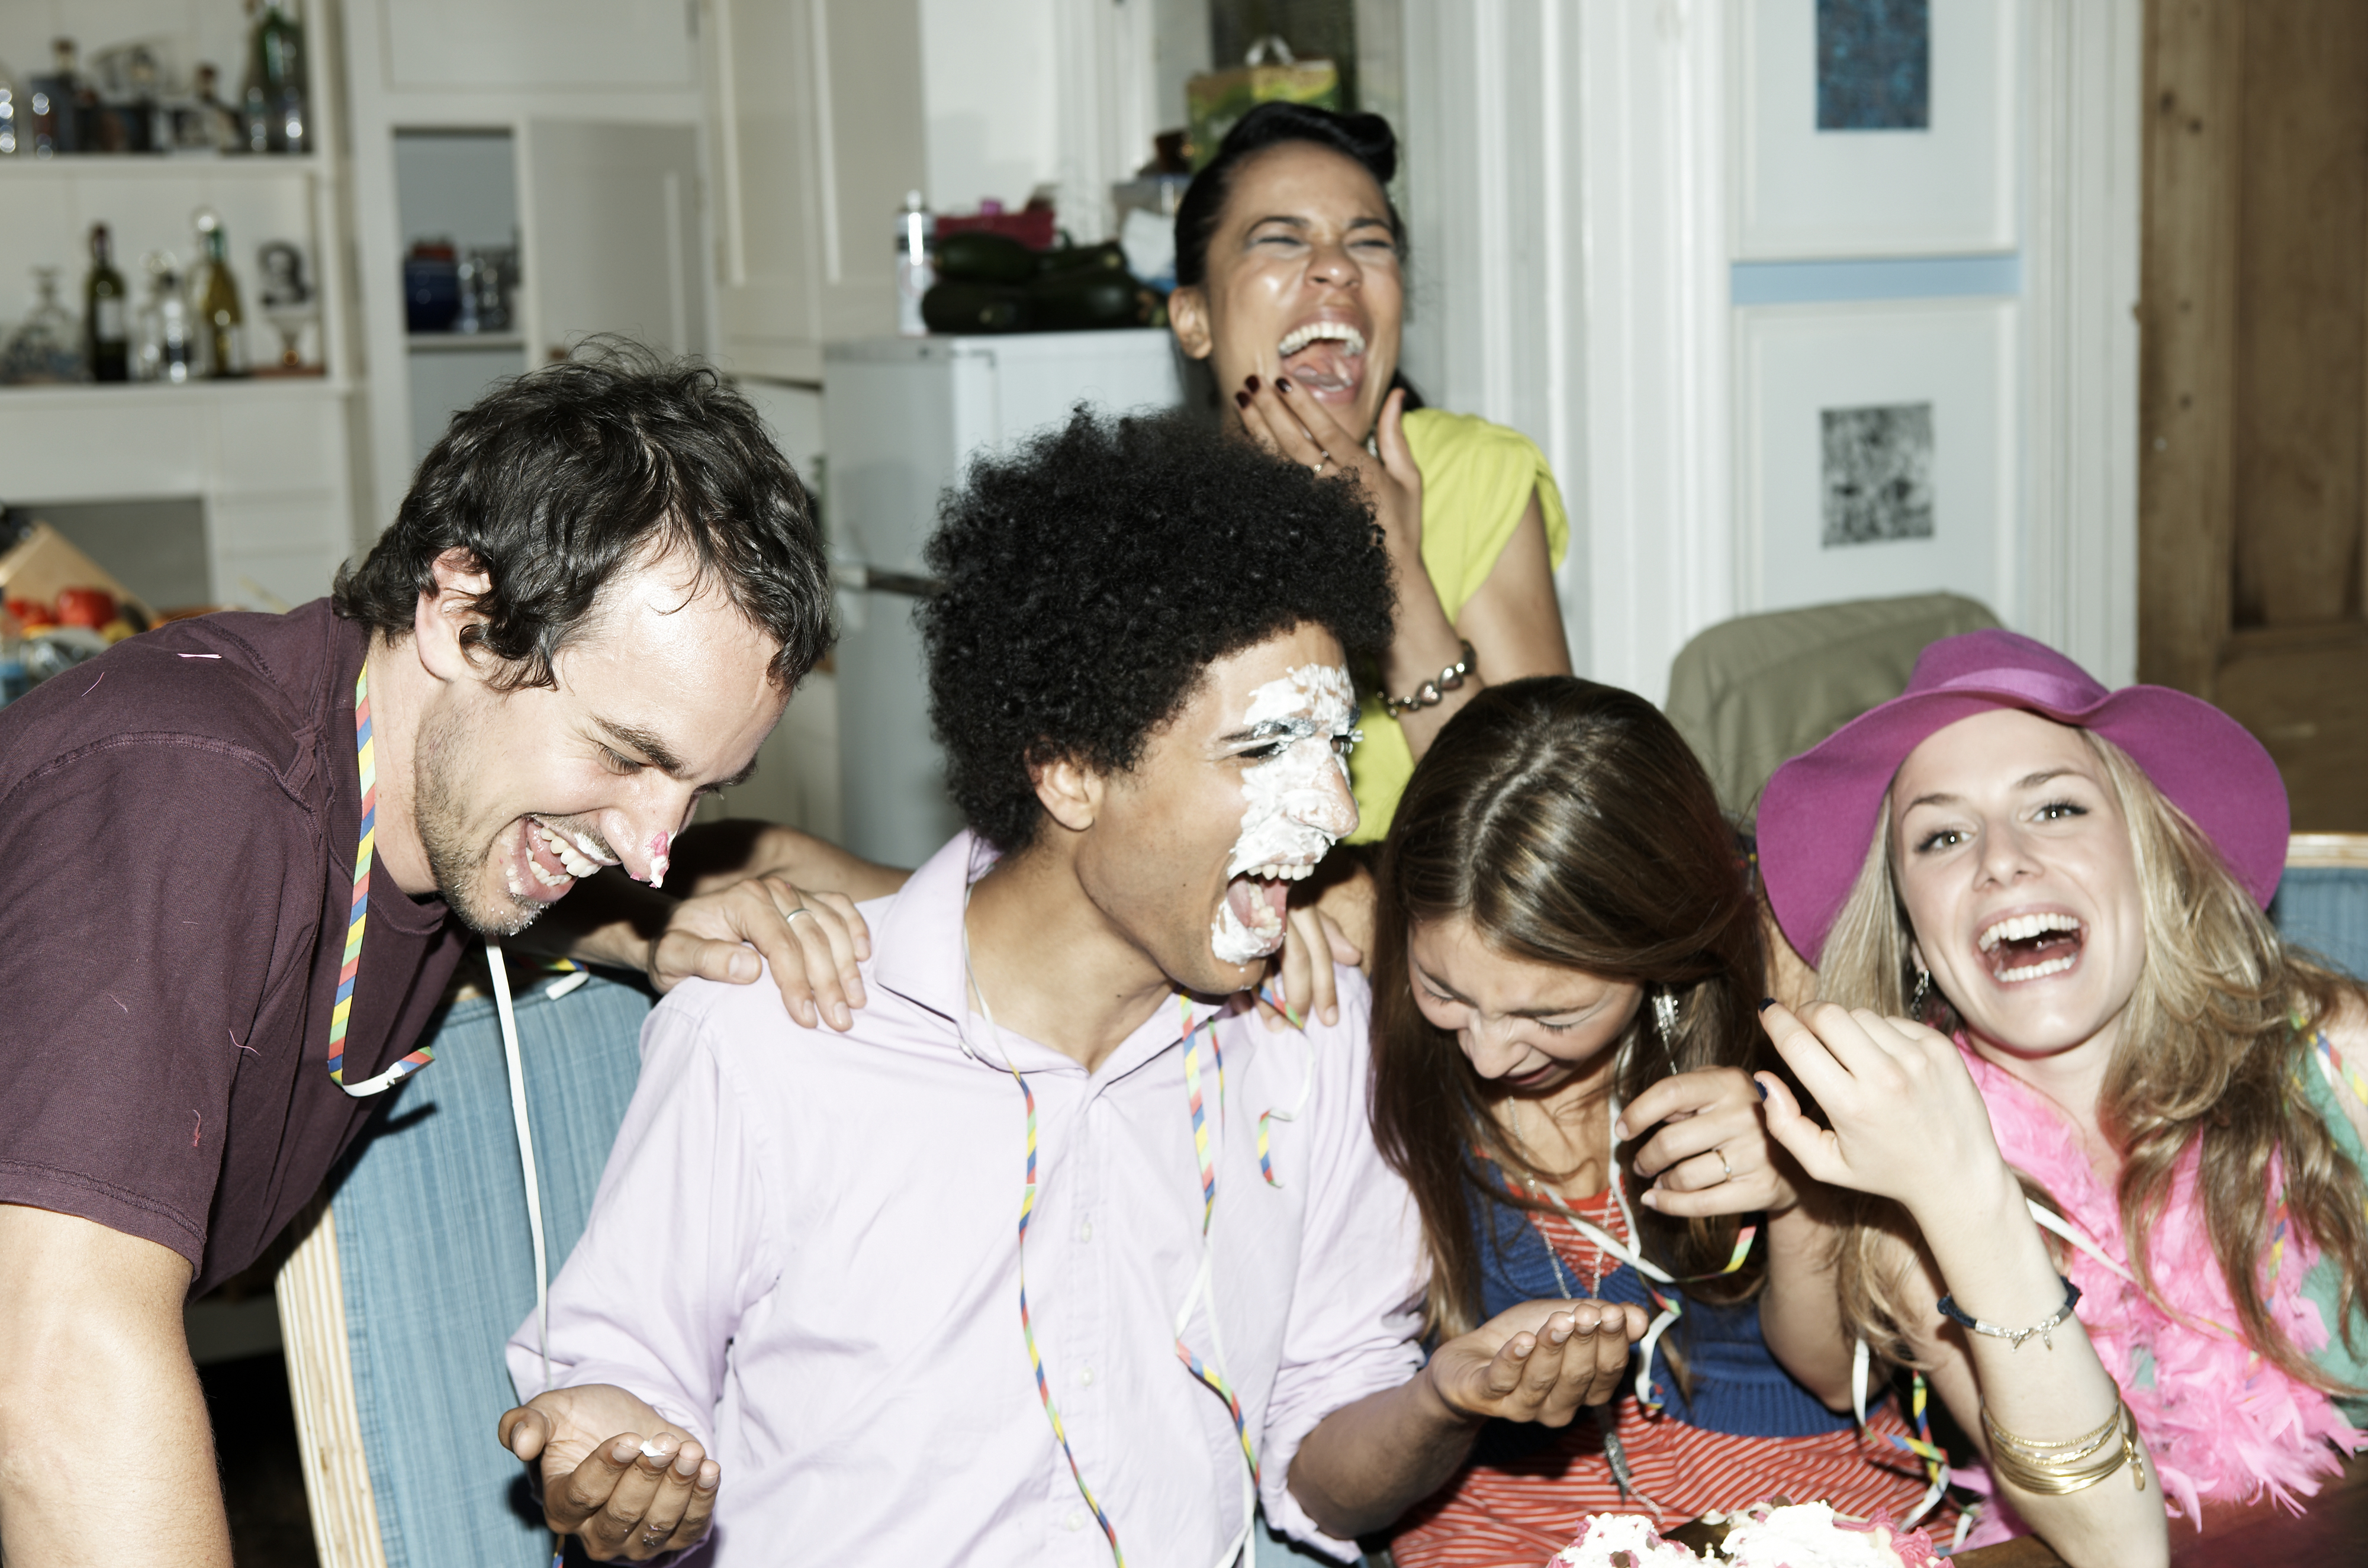 A group of people laughing together at a party, one with a face covered in cake